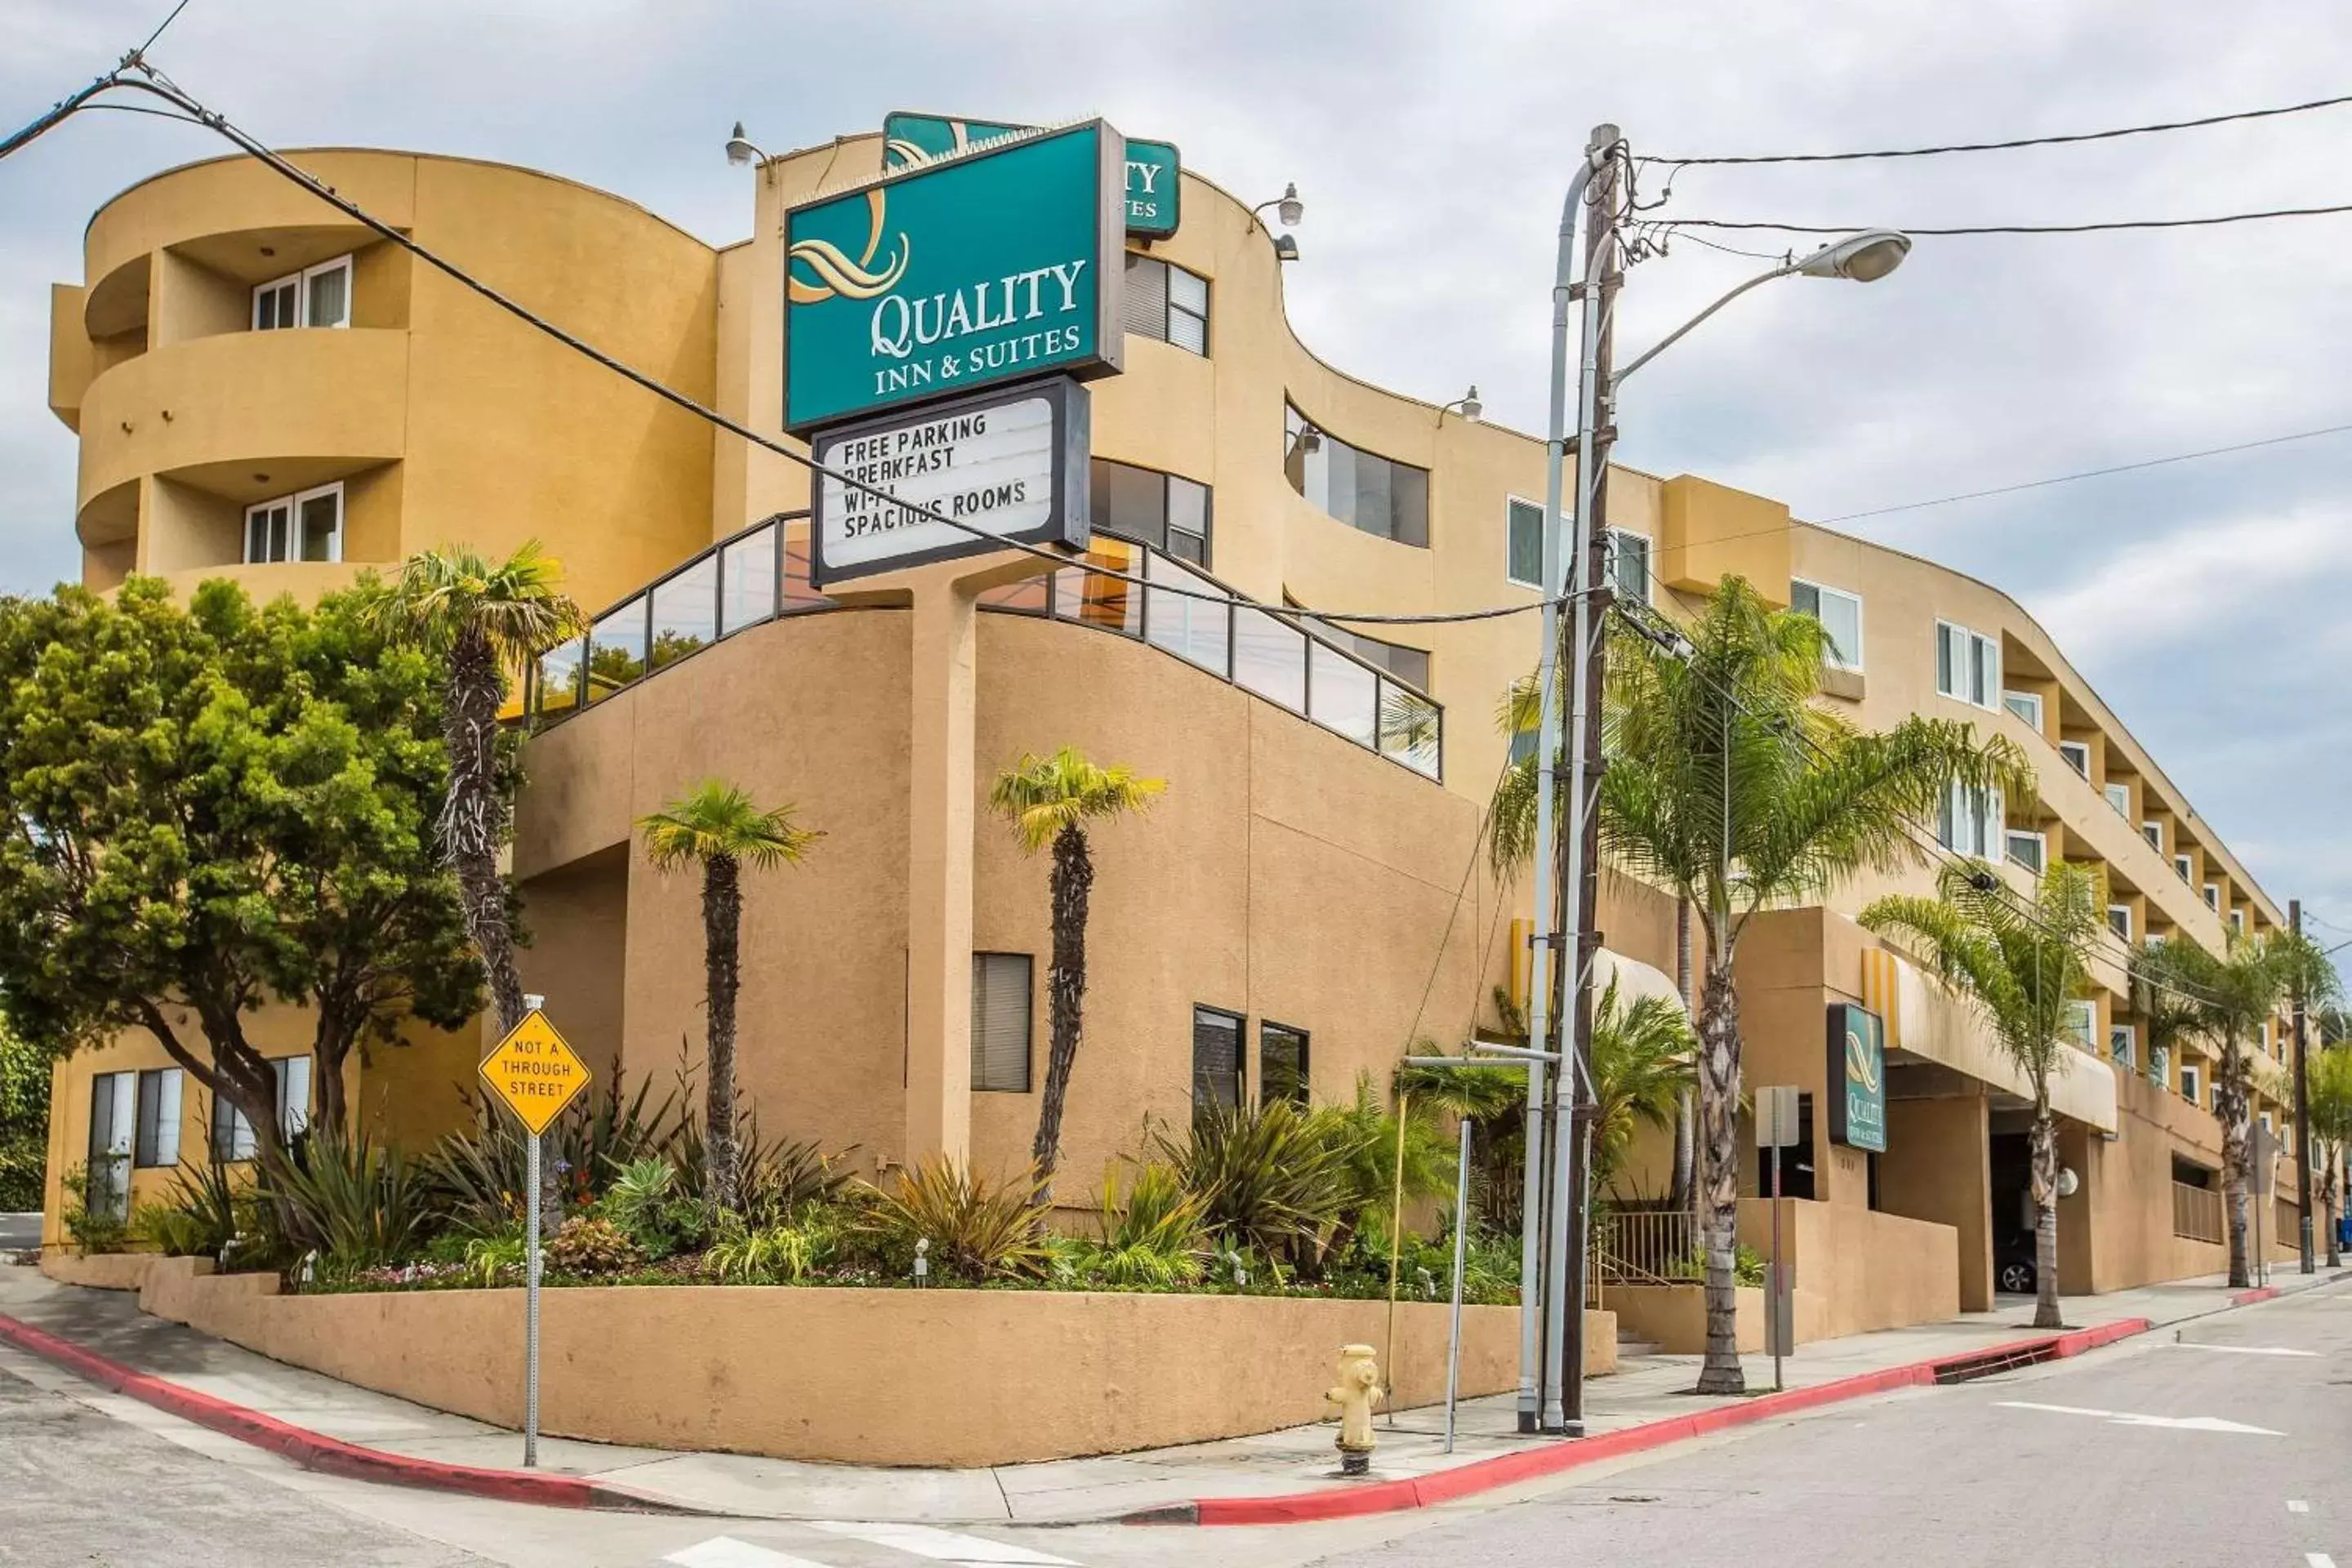 Property Building in Quality Inn & Suites Hermosa Beach